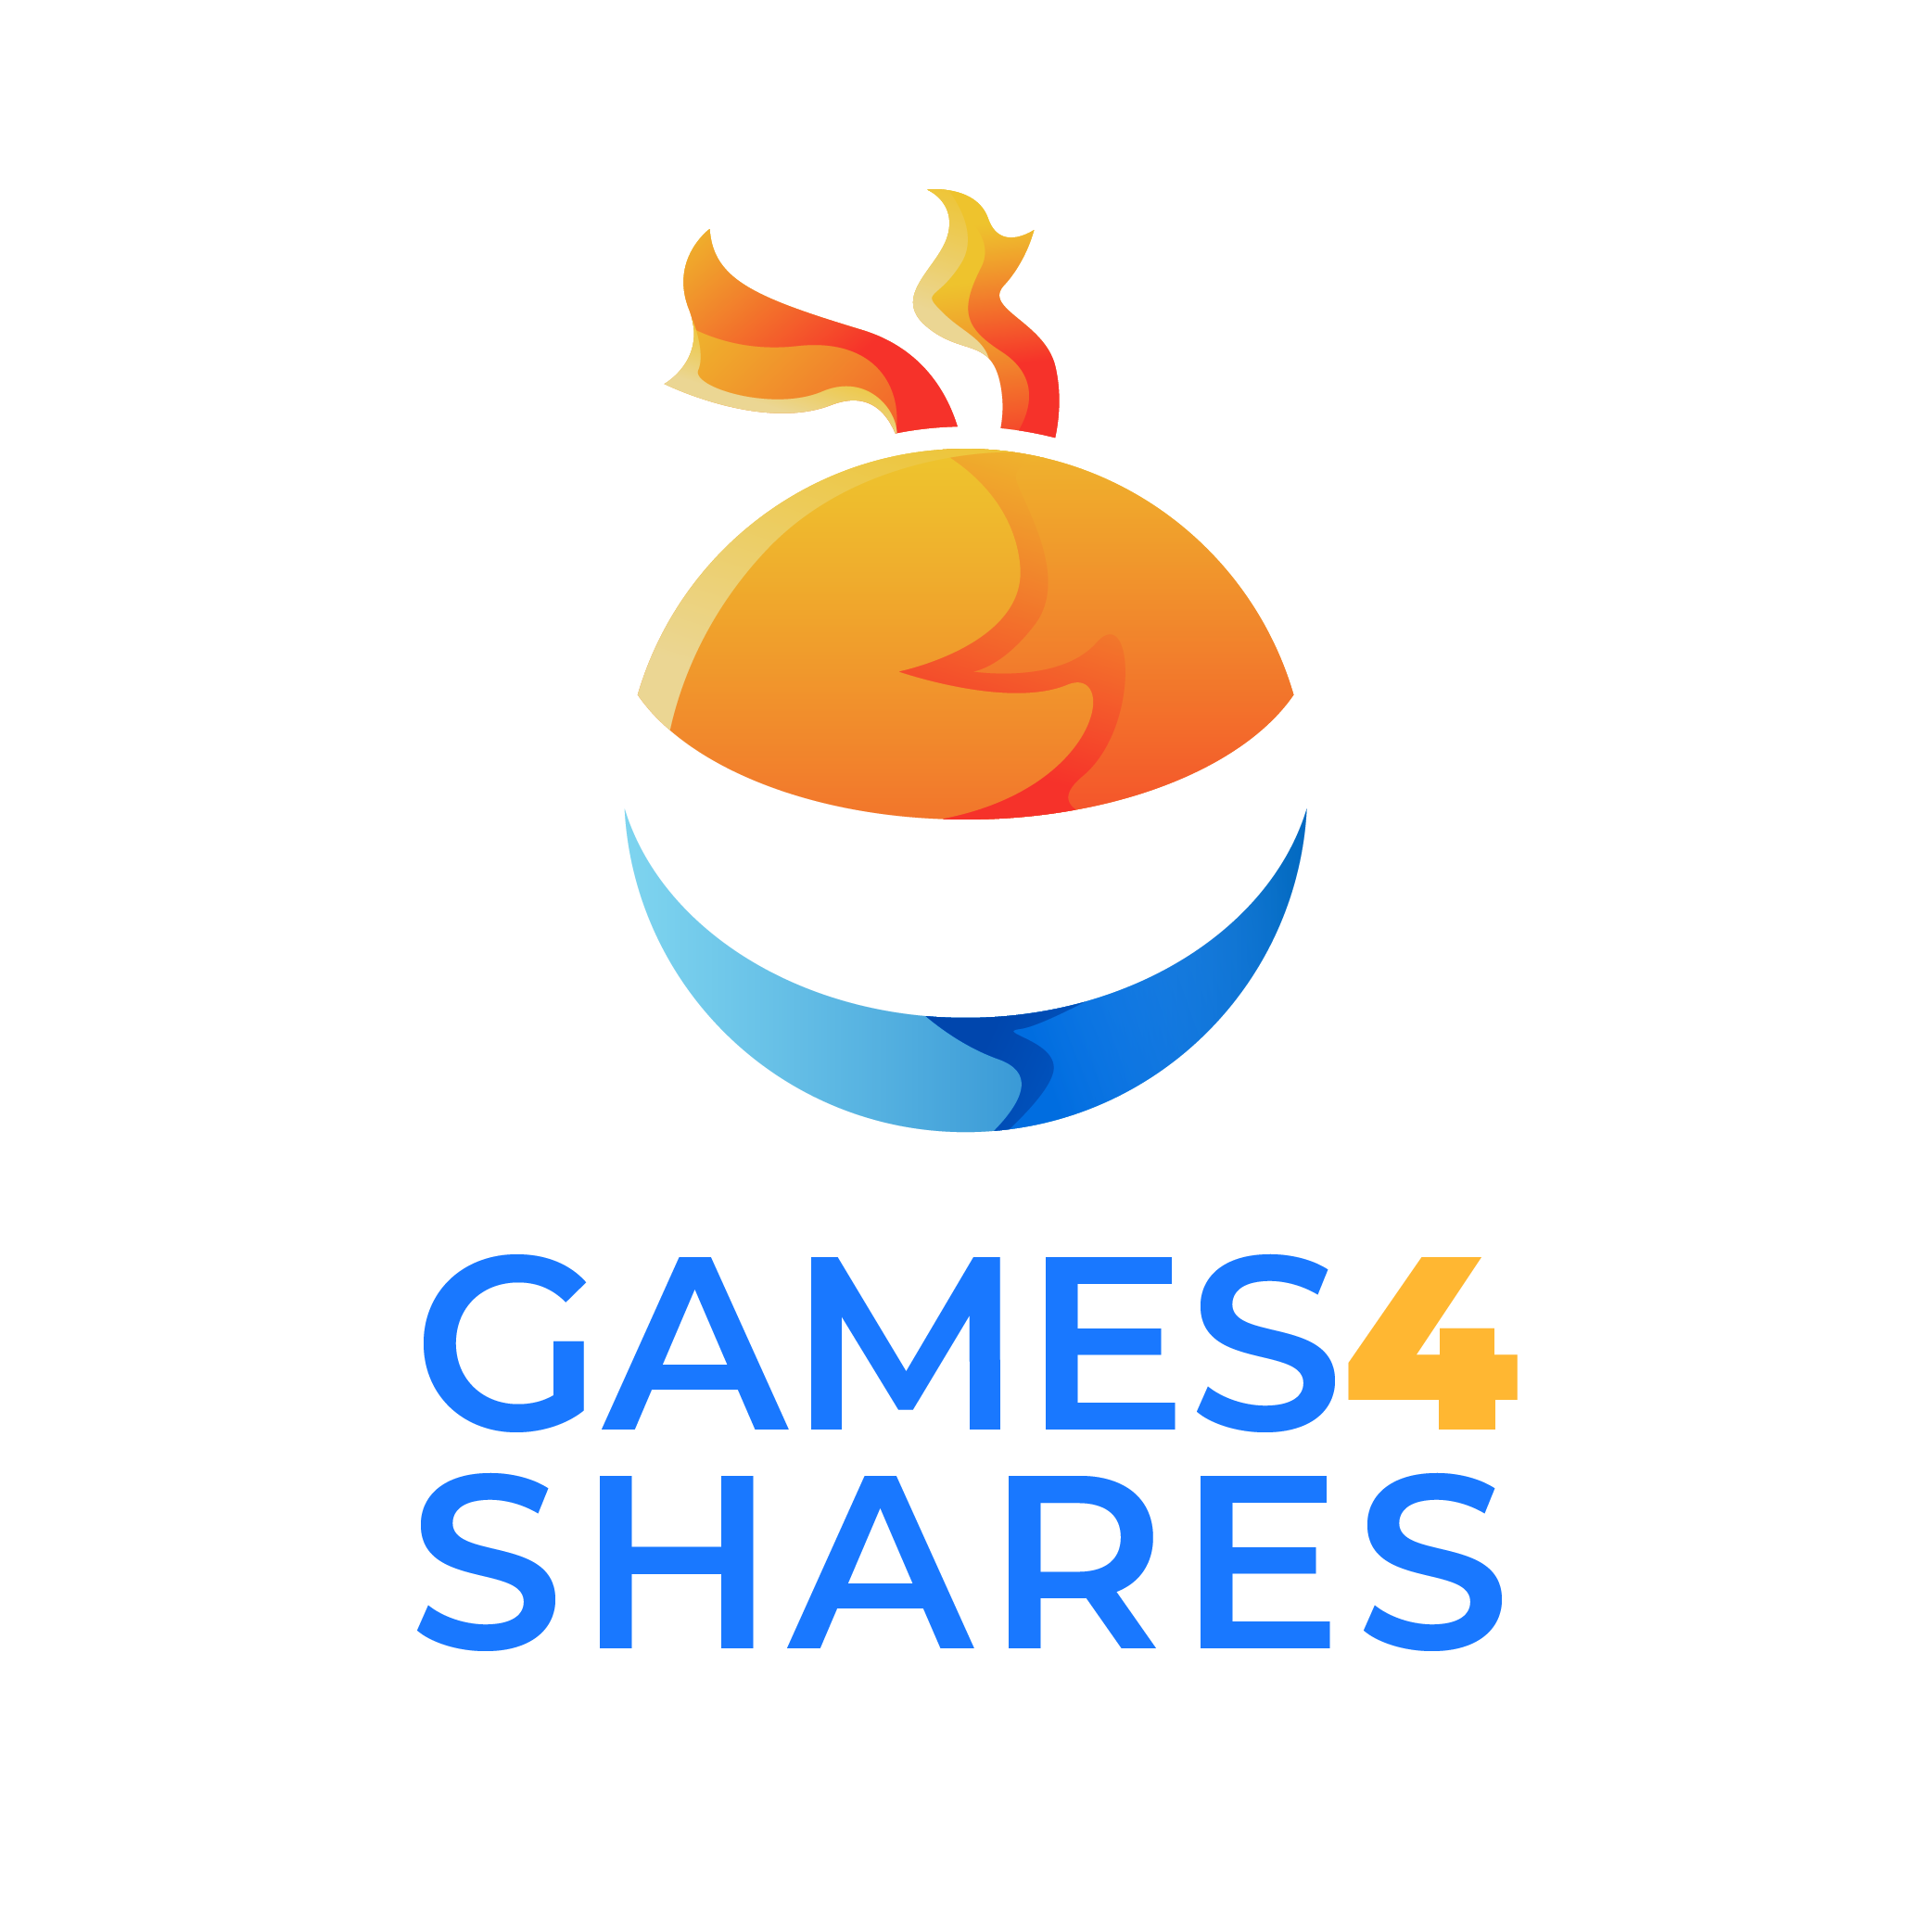 Games4share - Join the Free Gaming Revolution!